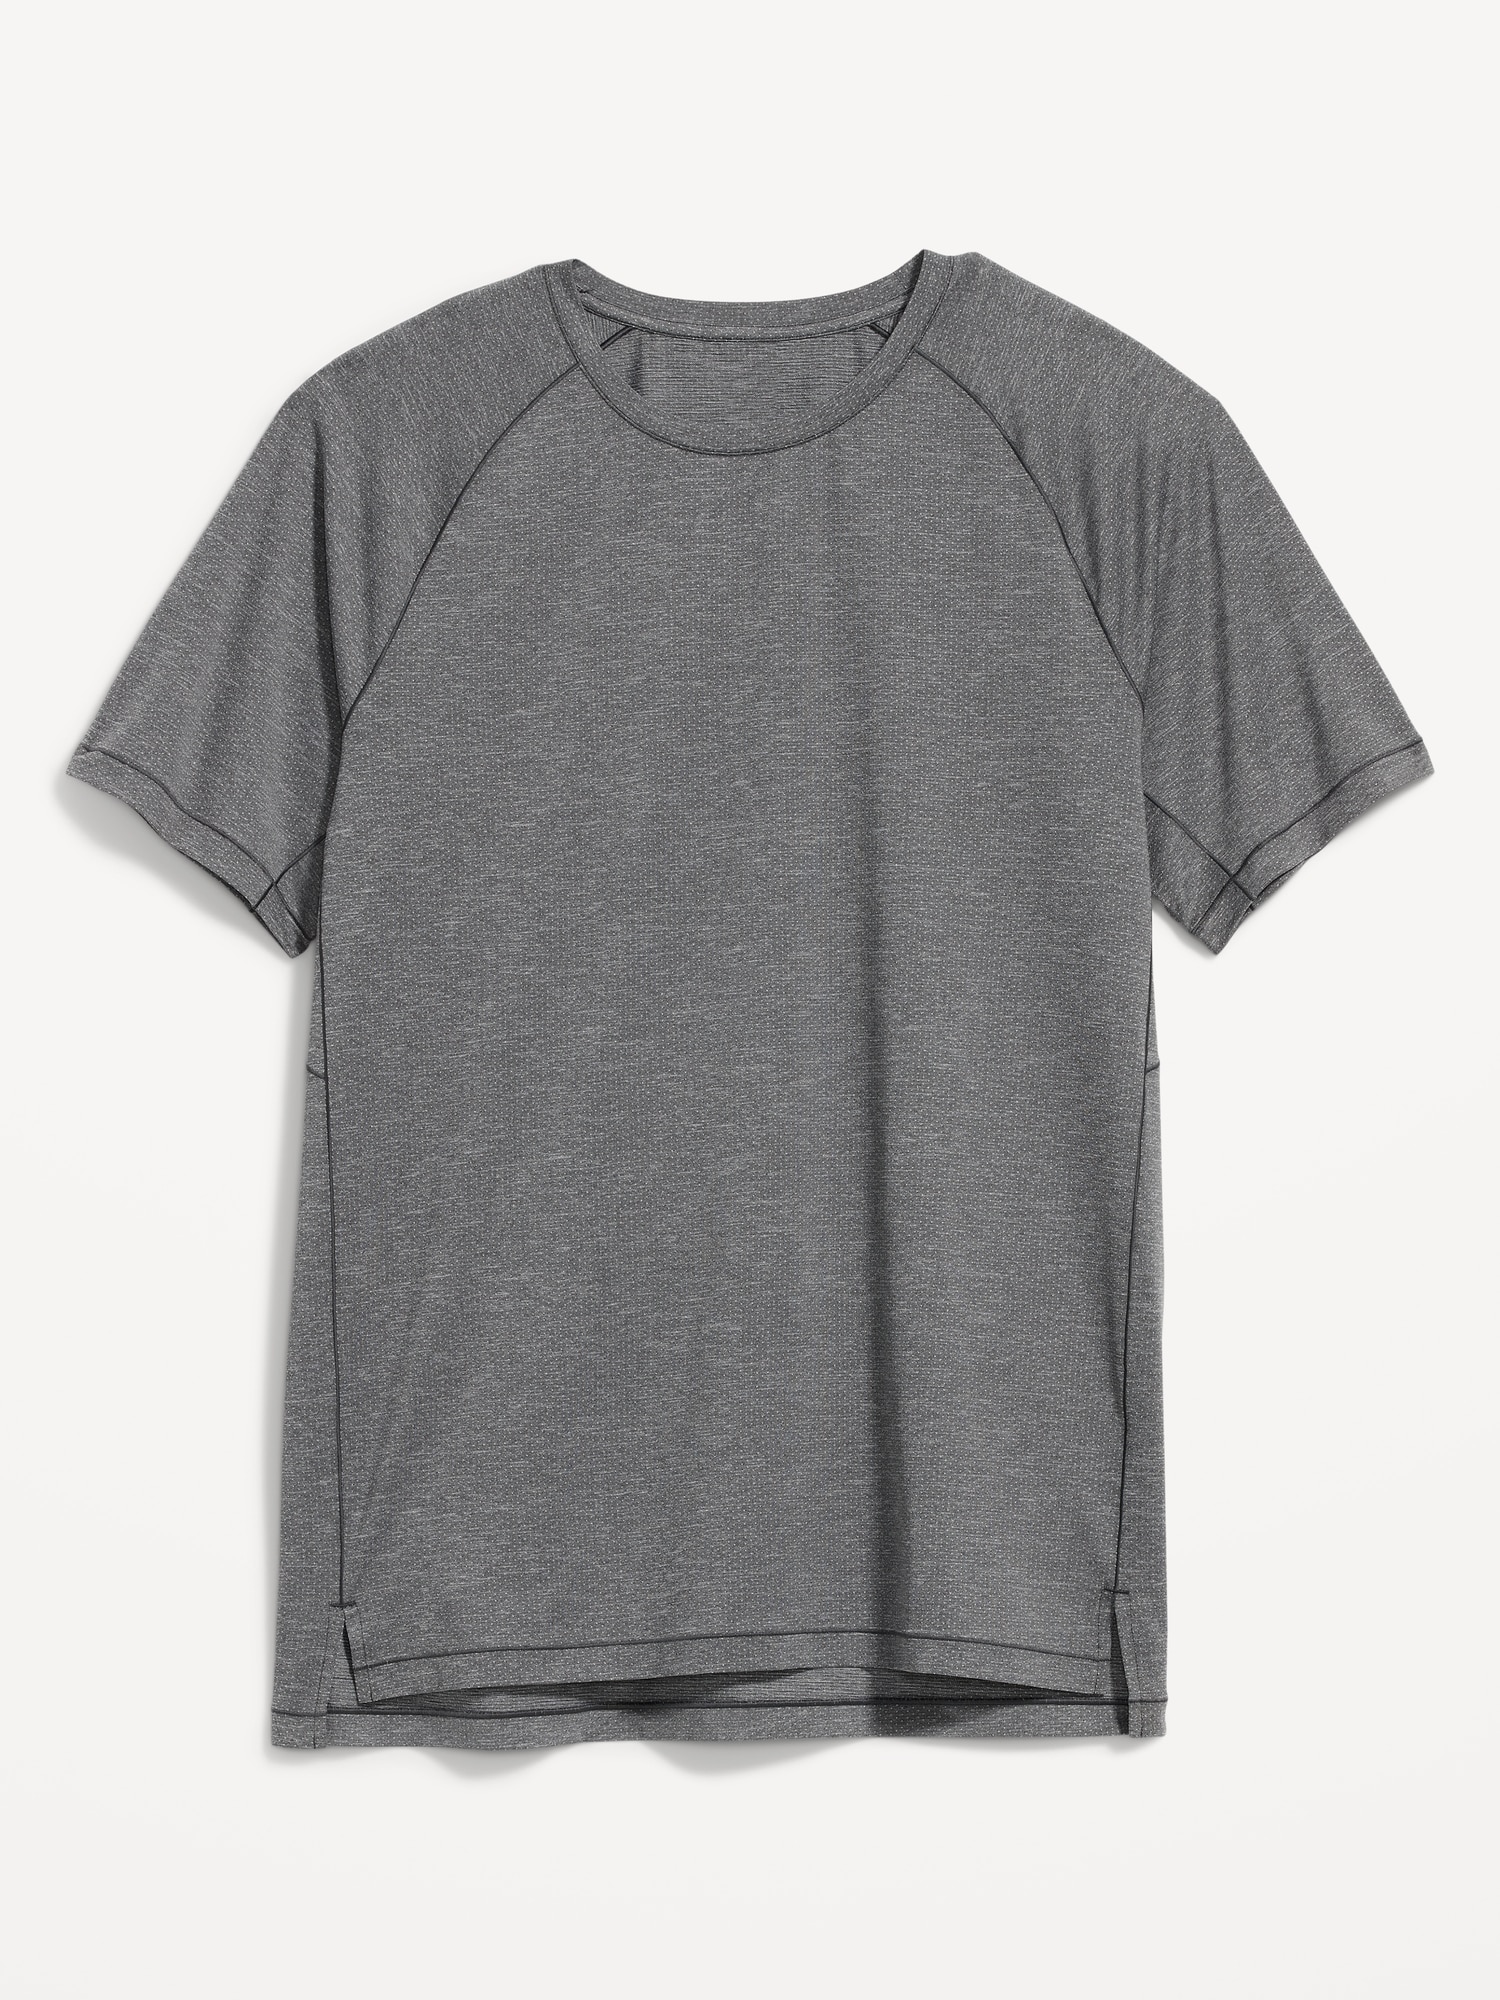 Performance Vent T-Shirt | Old Navy